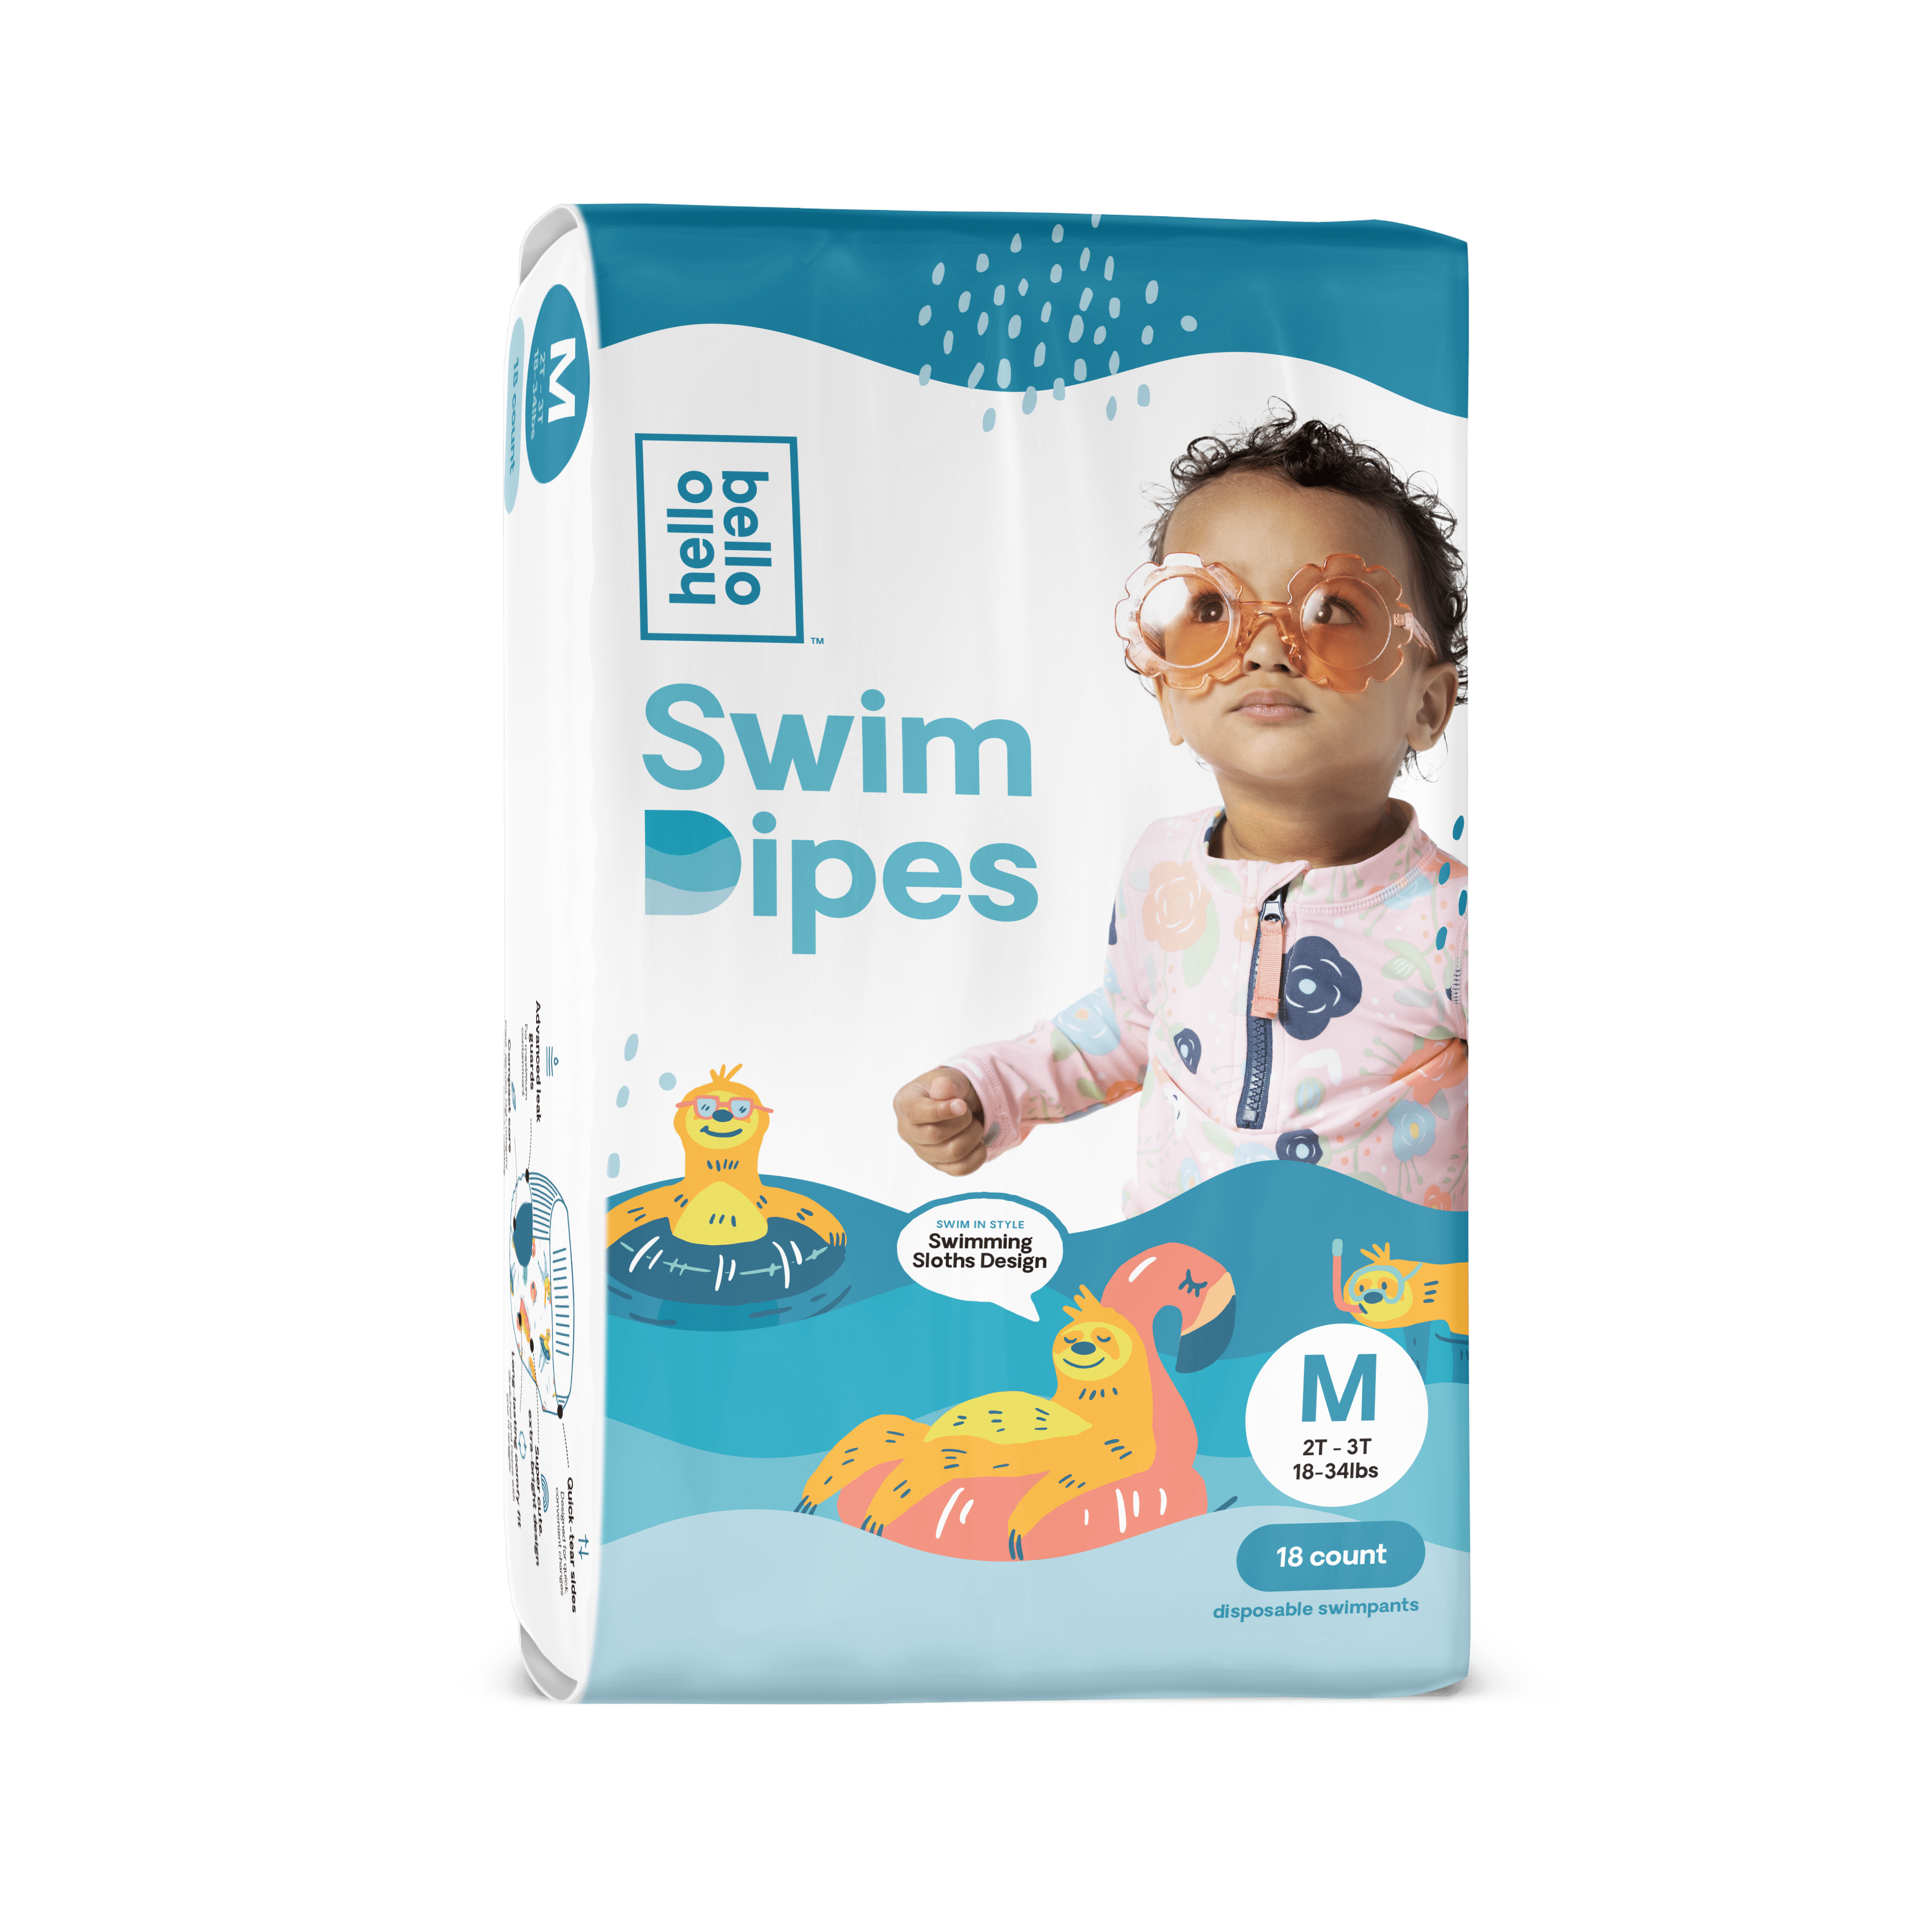 6x Pampers Sunnies Swim Pants 11 Medium Specially Designed For Pool Time 